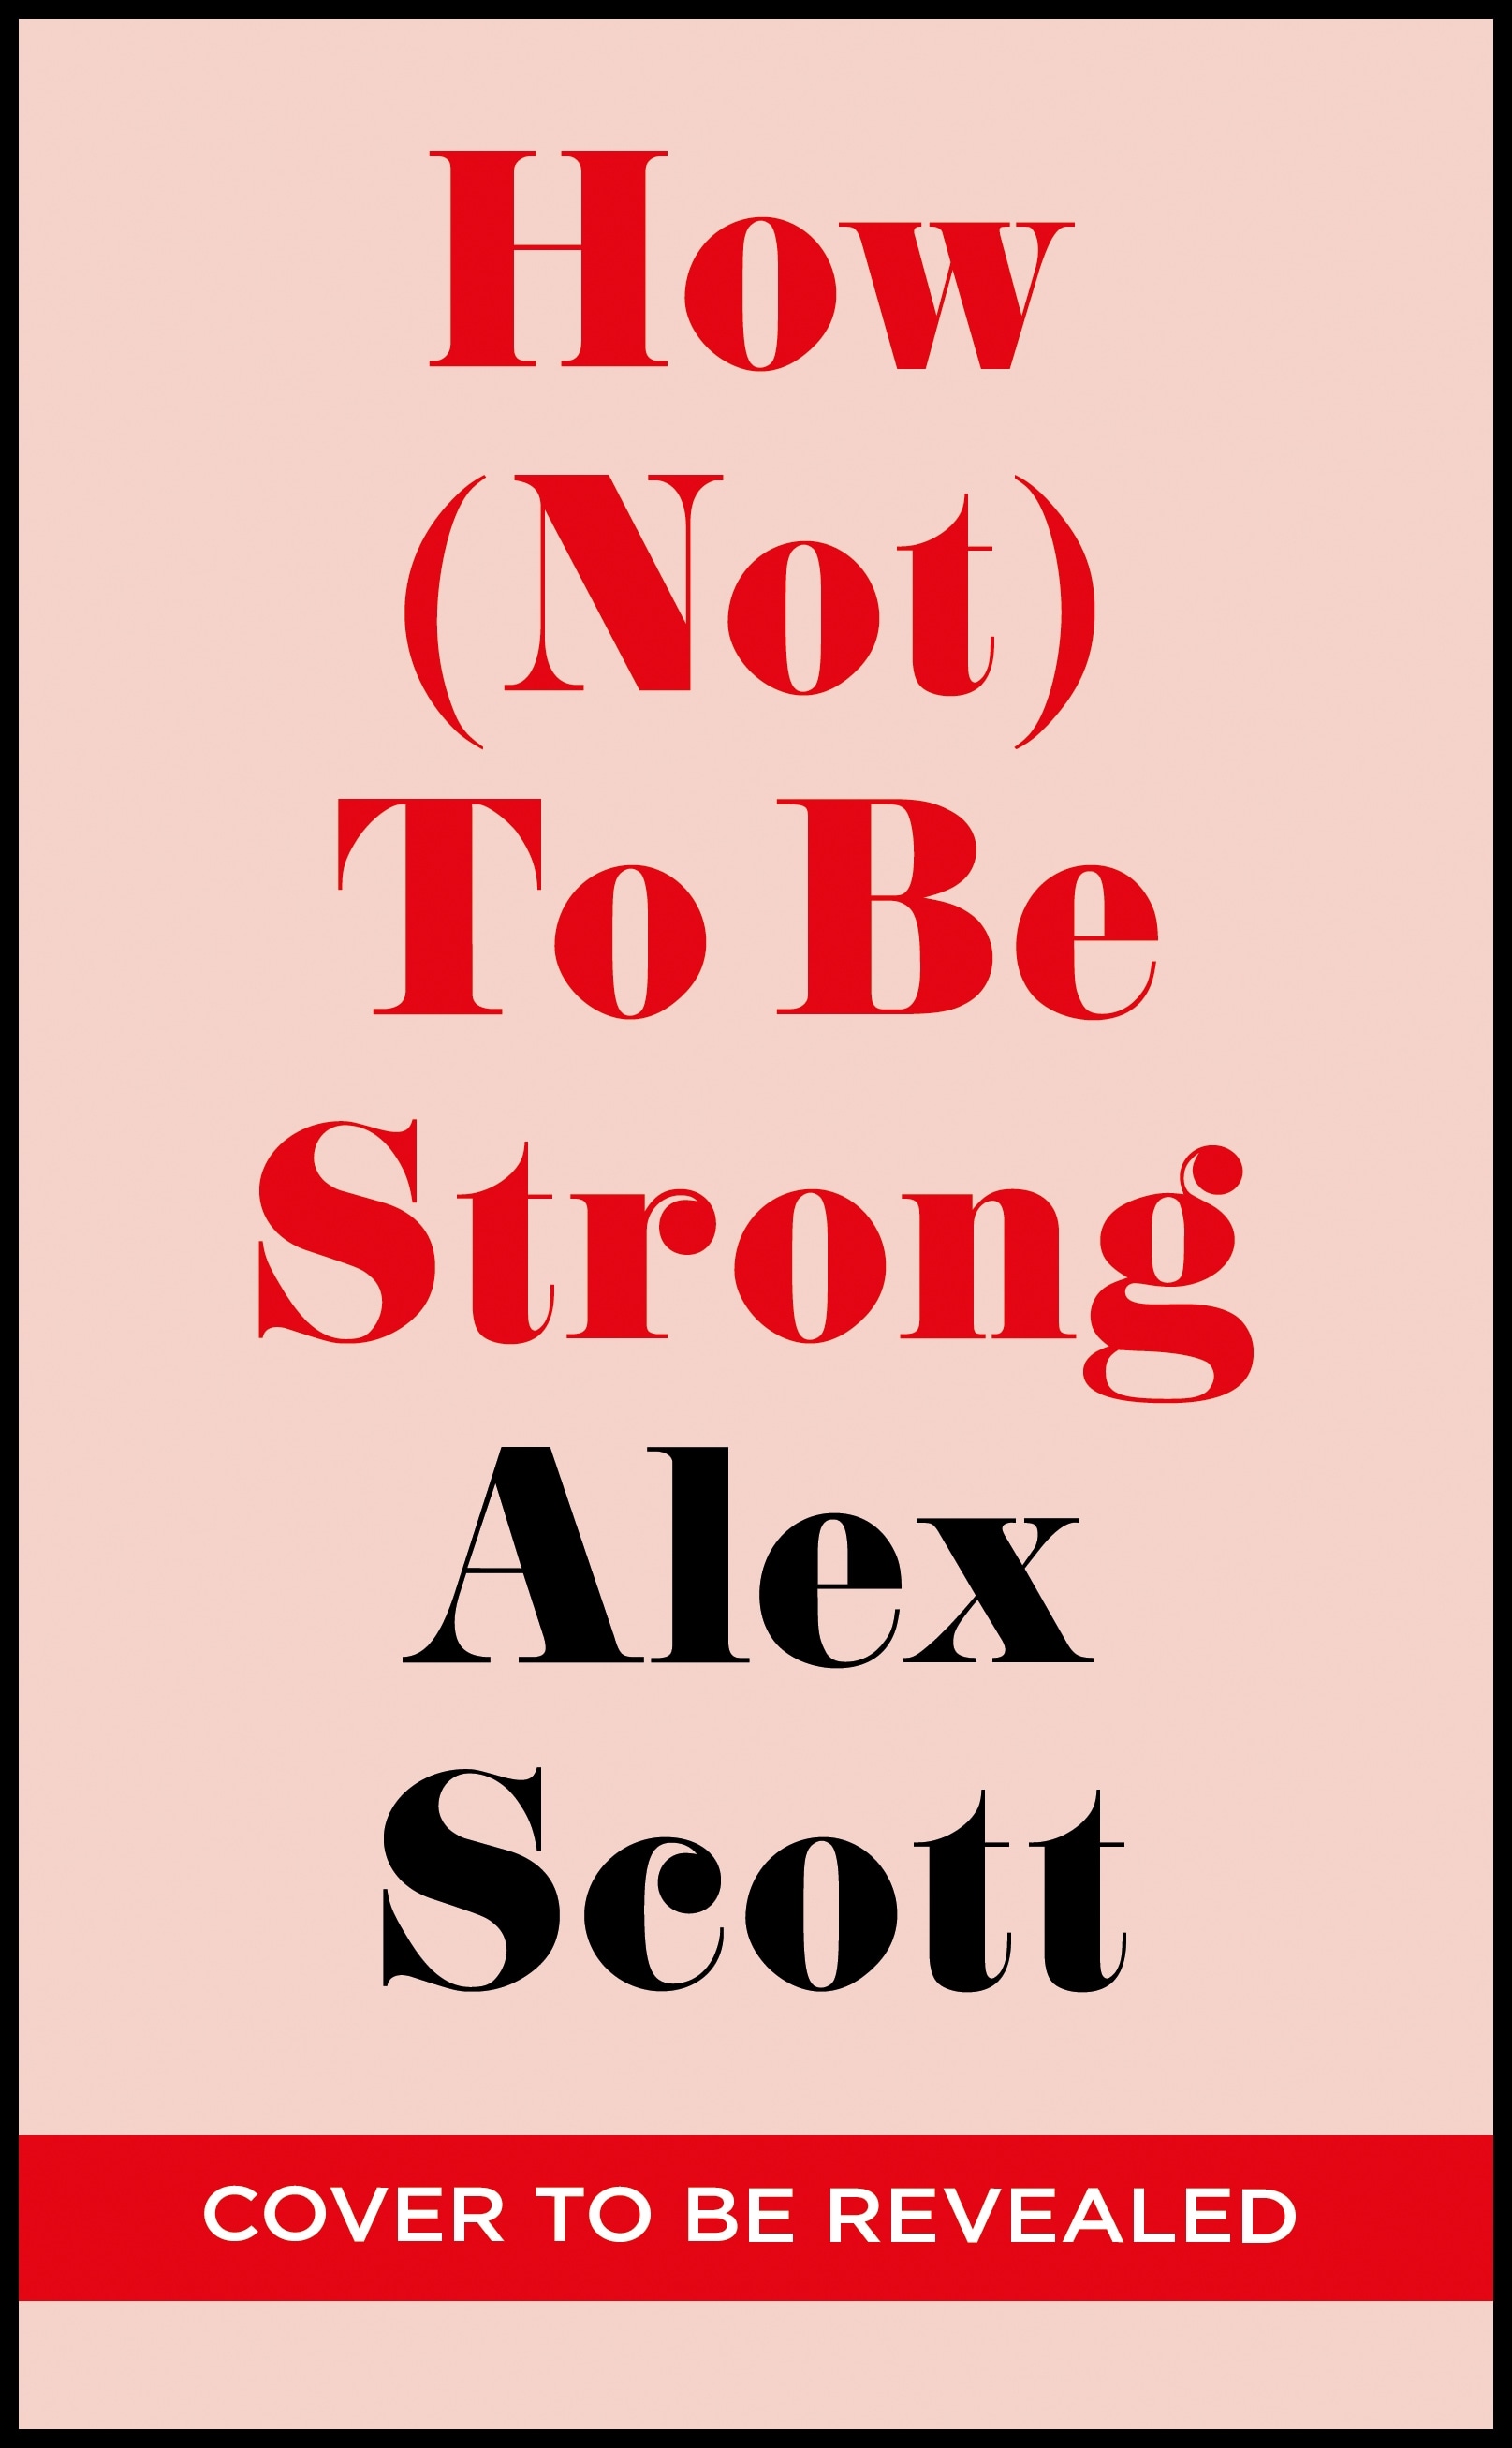 Book “How (Not) To Be Strong” by Alex Scott — September 29, 2022